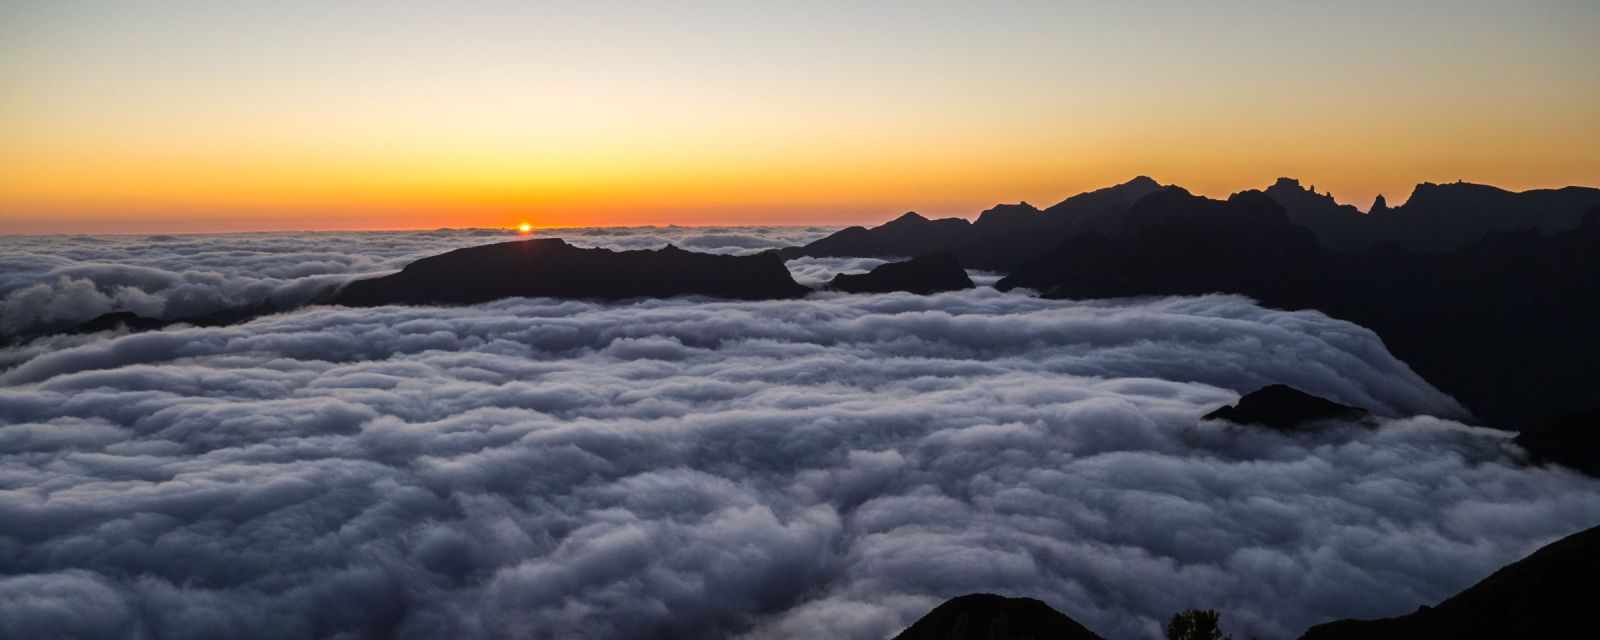 Best Places to Watch the Sunrise and Sunset in Madeira